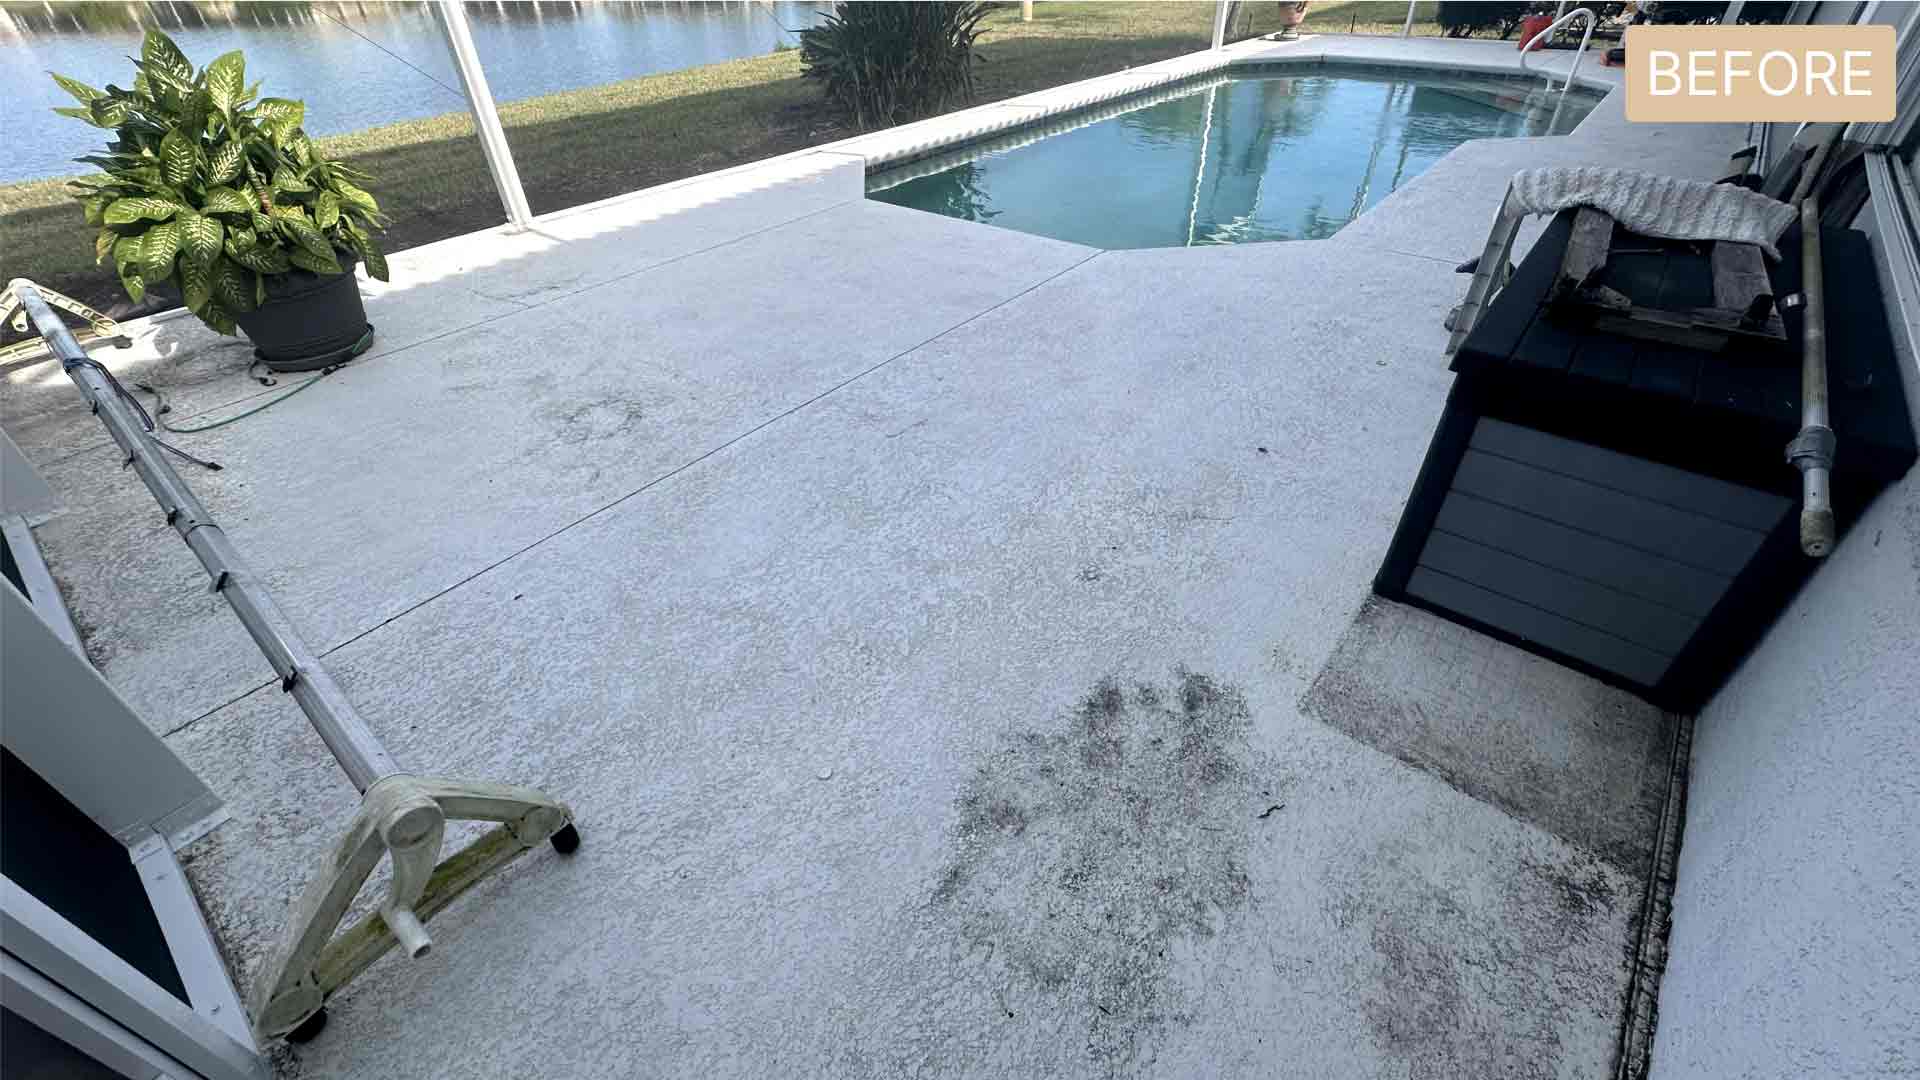 Pressure washing – Feb 1 | Goldmillio cleaning service in Cape Coral